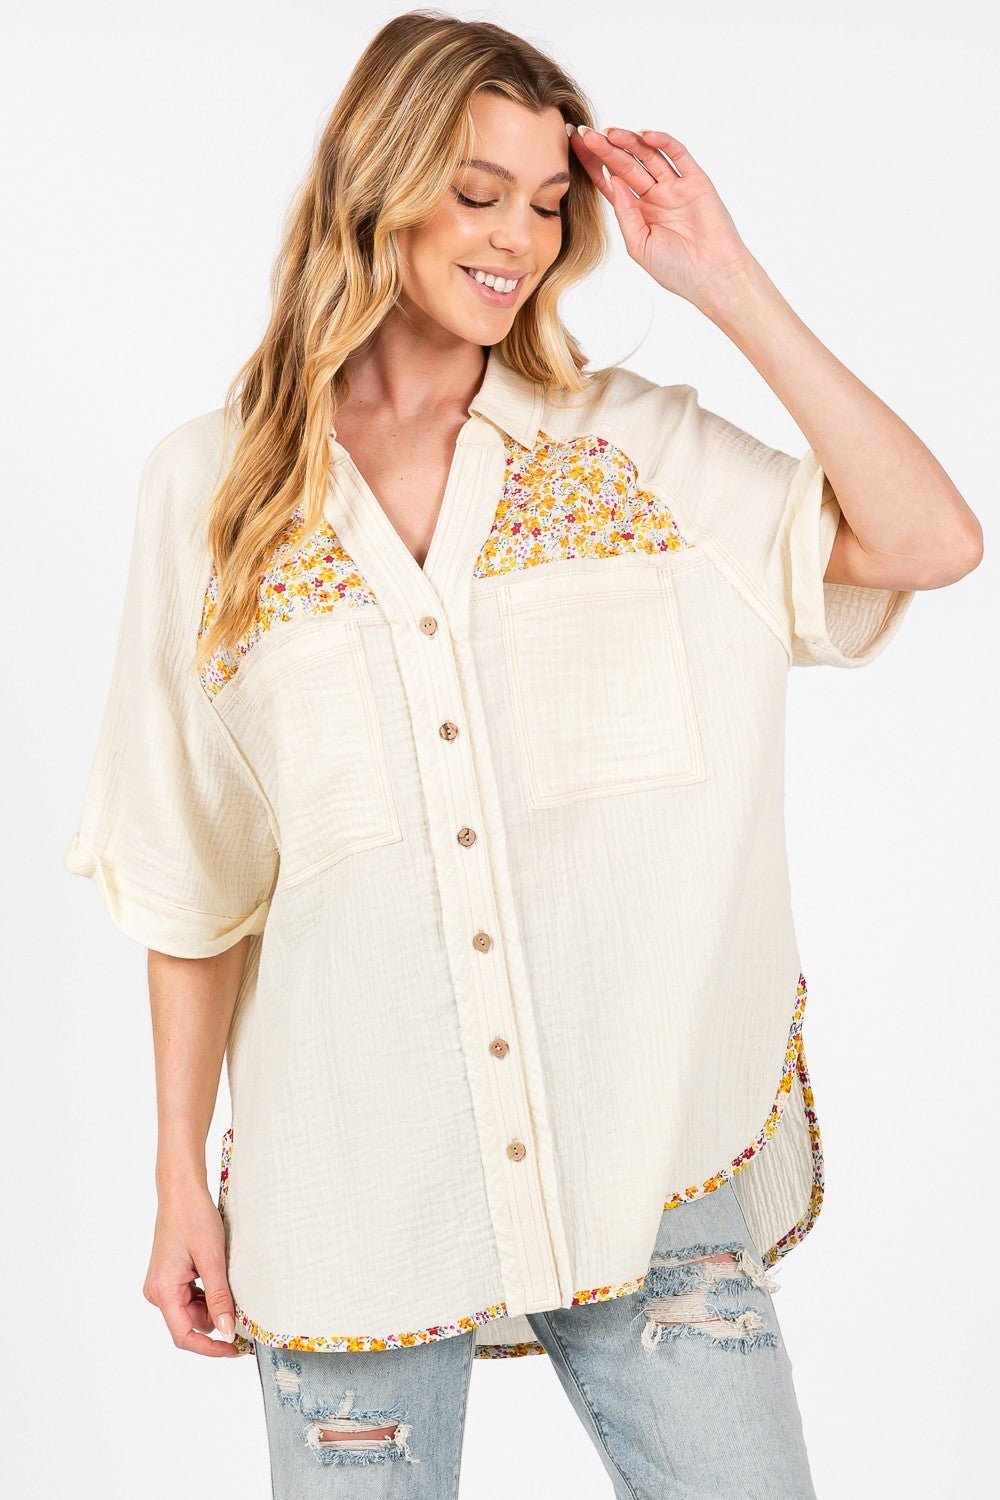 Floral Detail Button Up Short Sleeve Shirt in IvoryShirtSAGE+FIG